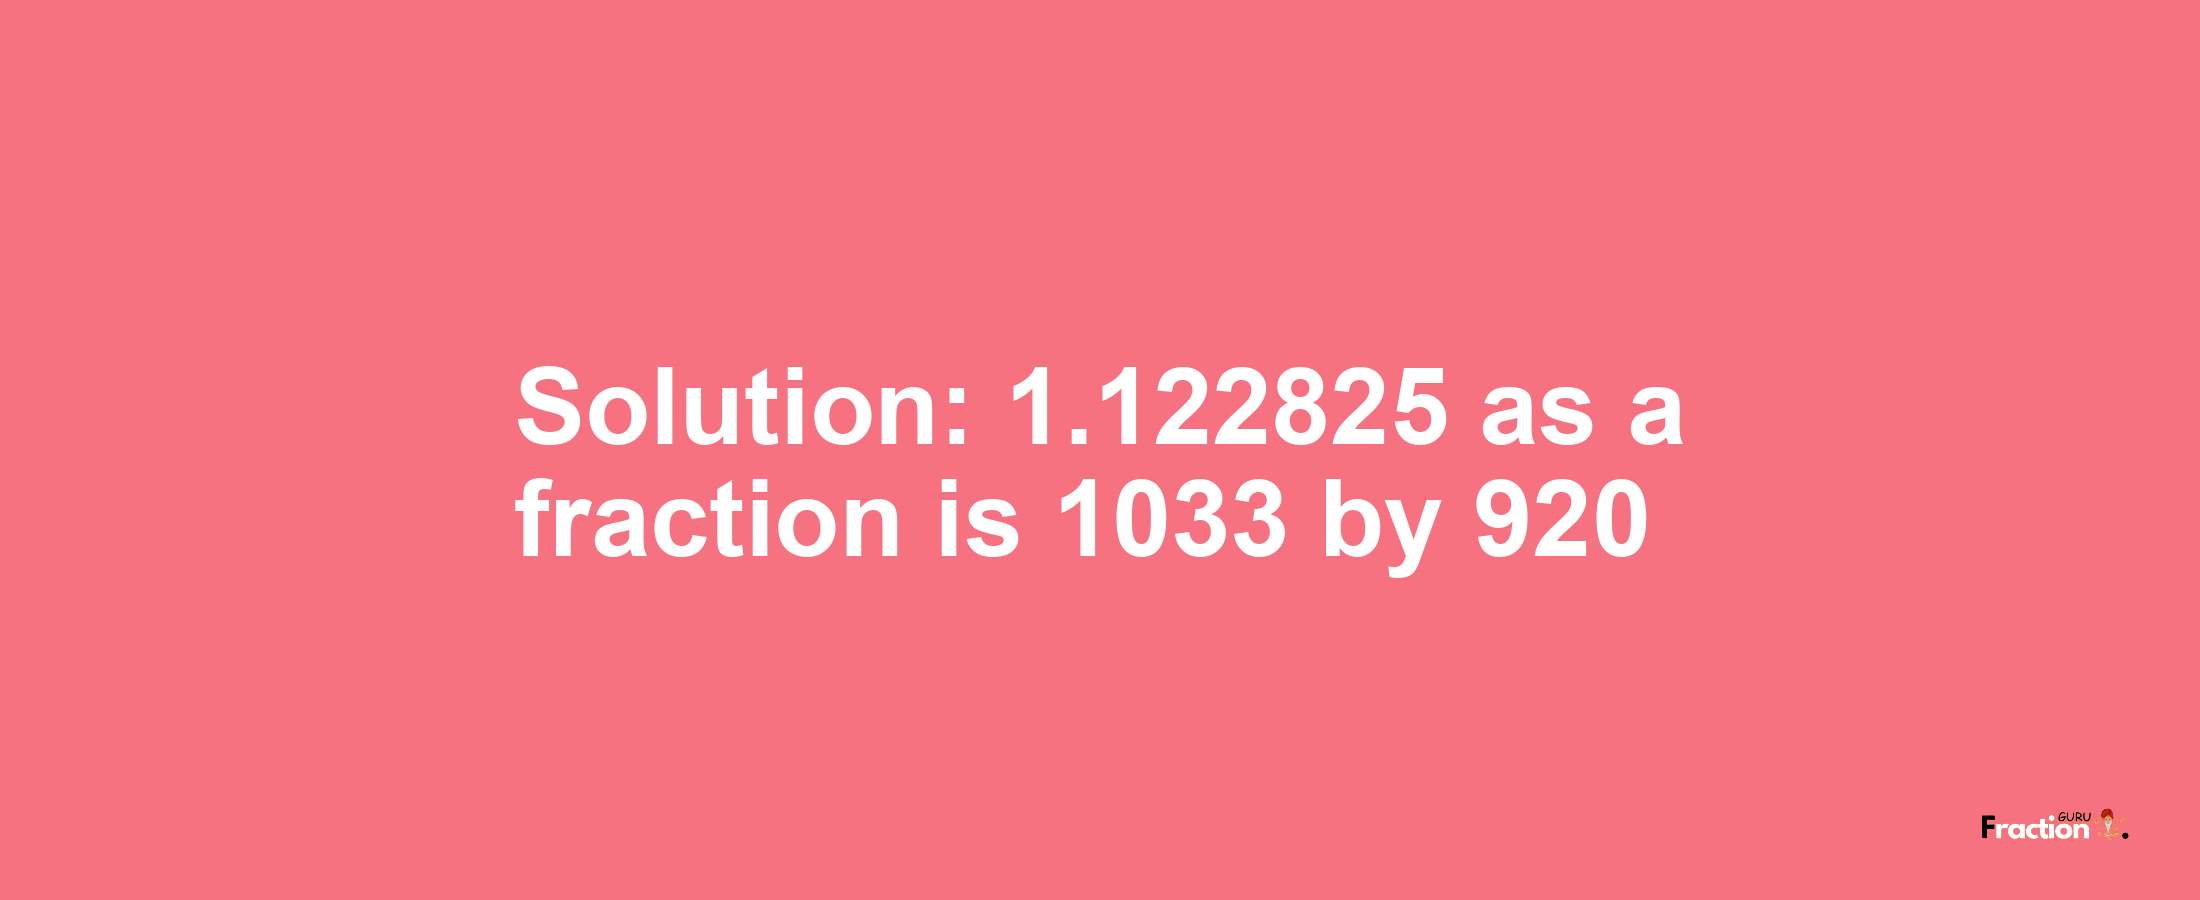 Solution:1.122825 as a fraction is 1033/920